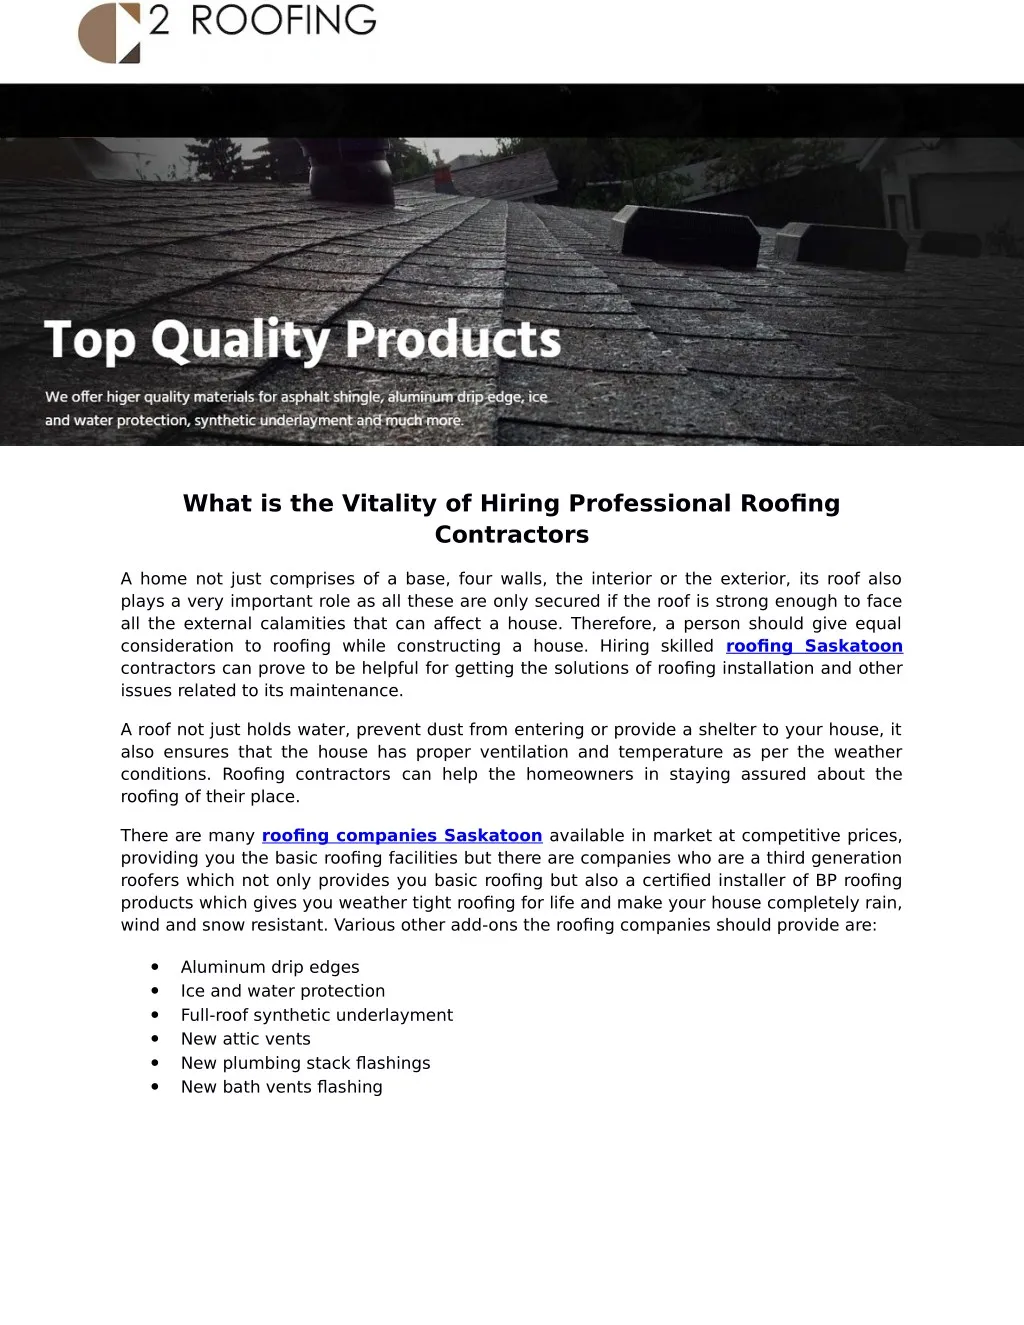 what is the vitality of hiring professional